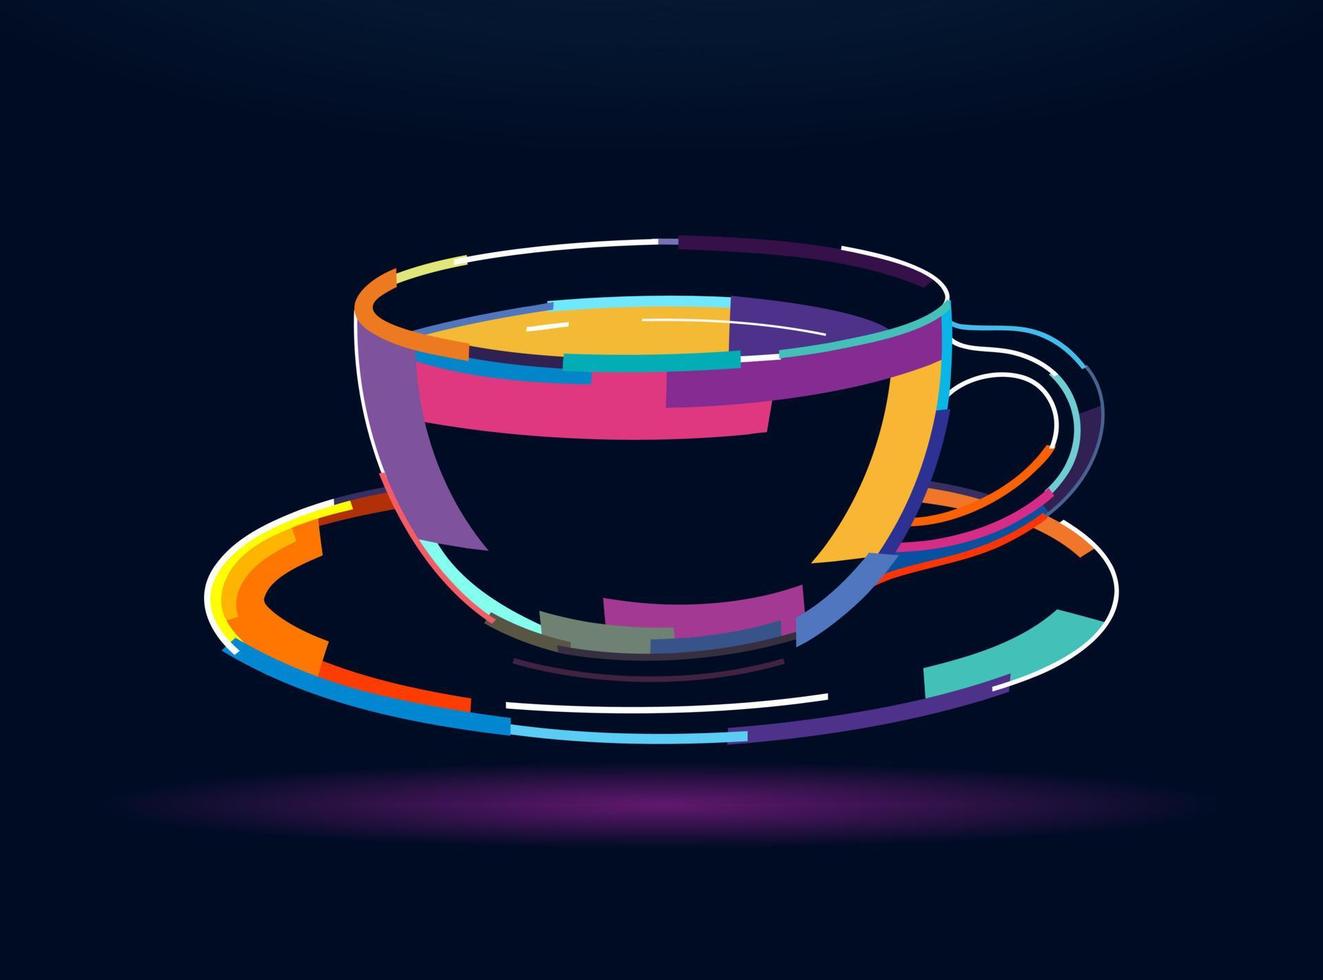 A cup or mug of hot drink. A cup of coffee, cup of tea, abstract, colorful drawing. Vector illustration of paints